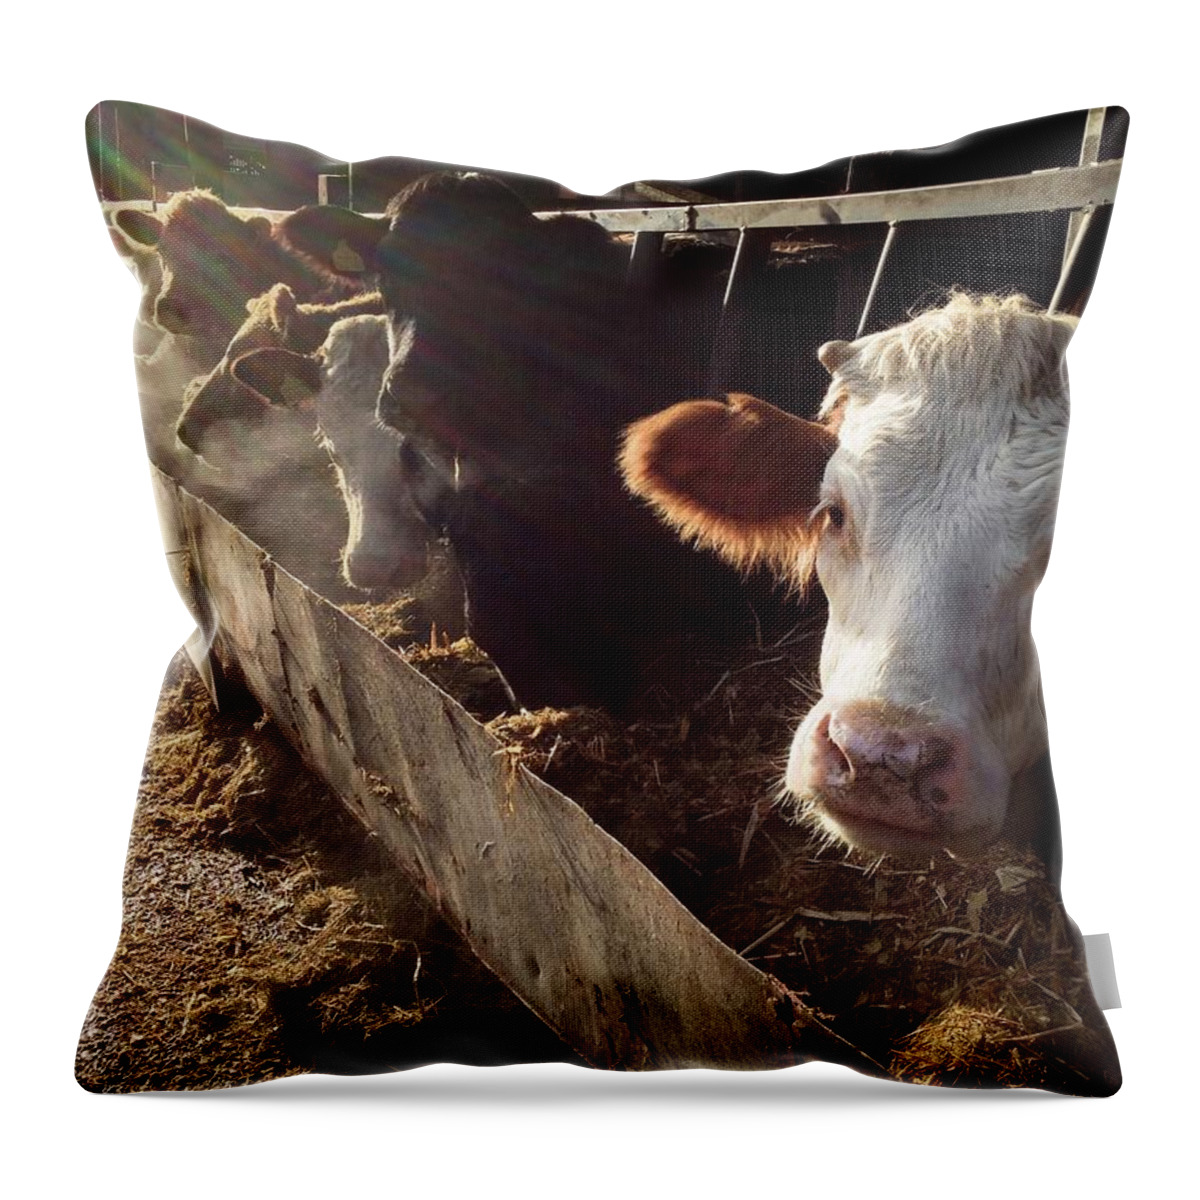 In A Row Throw Pillow featuring the photograph Cows Looking Out Of A Barn by James Ephraums